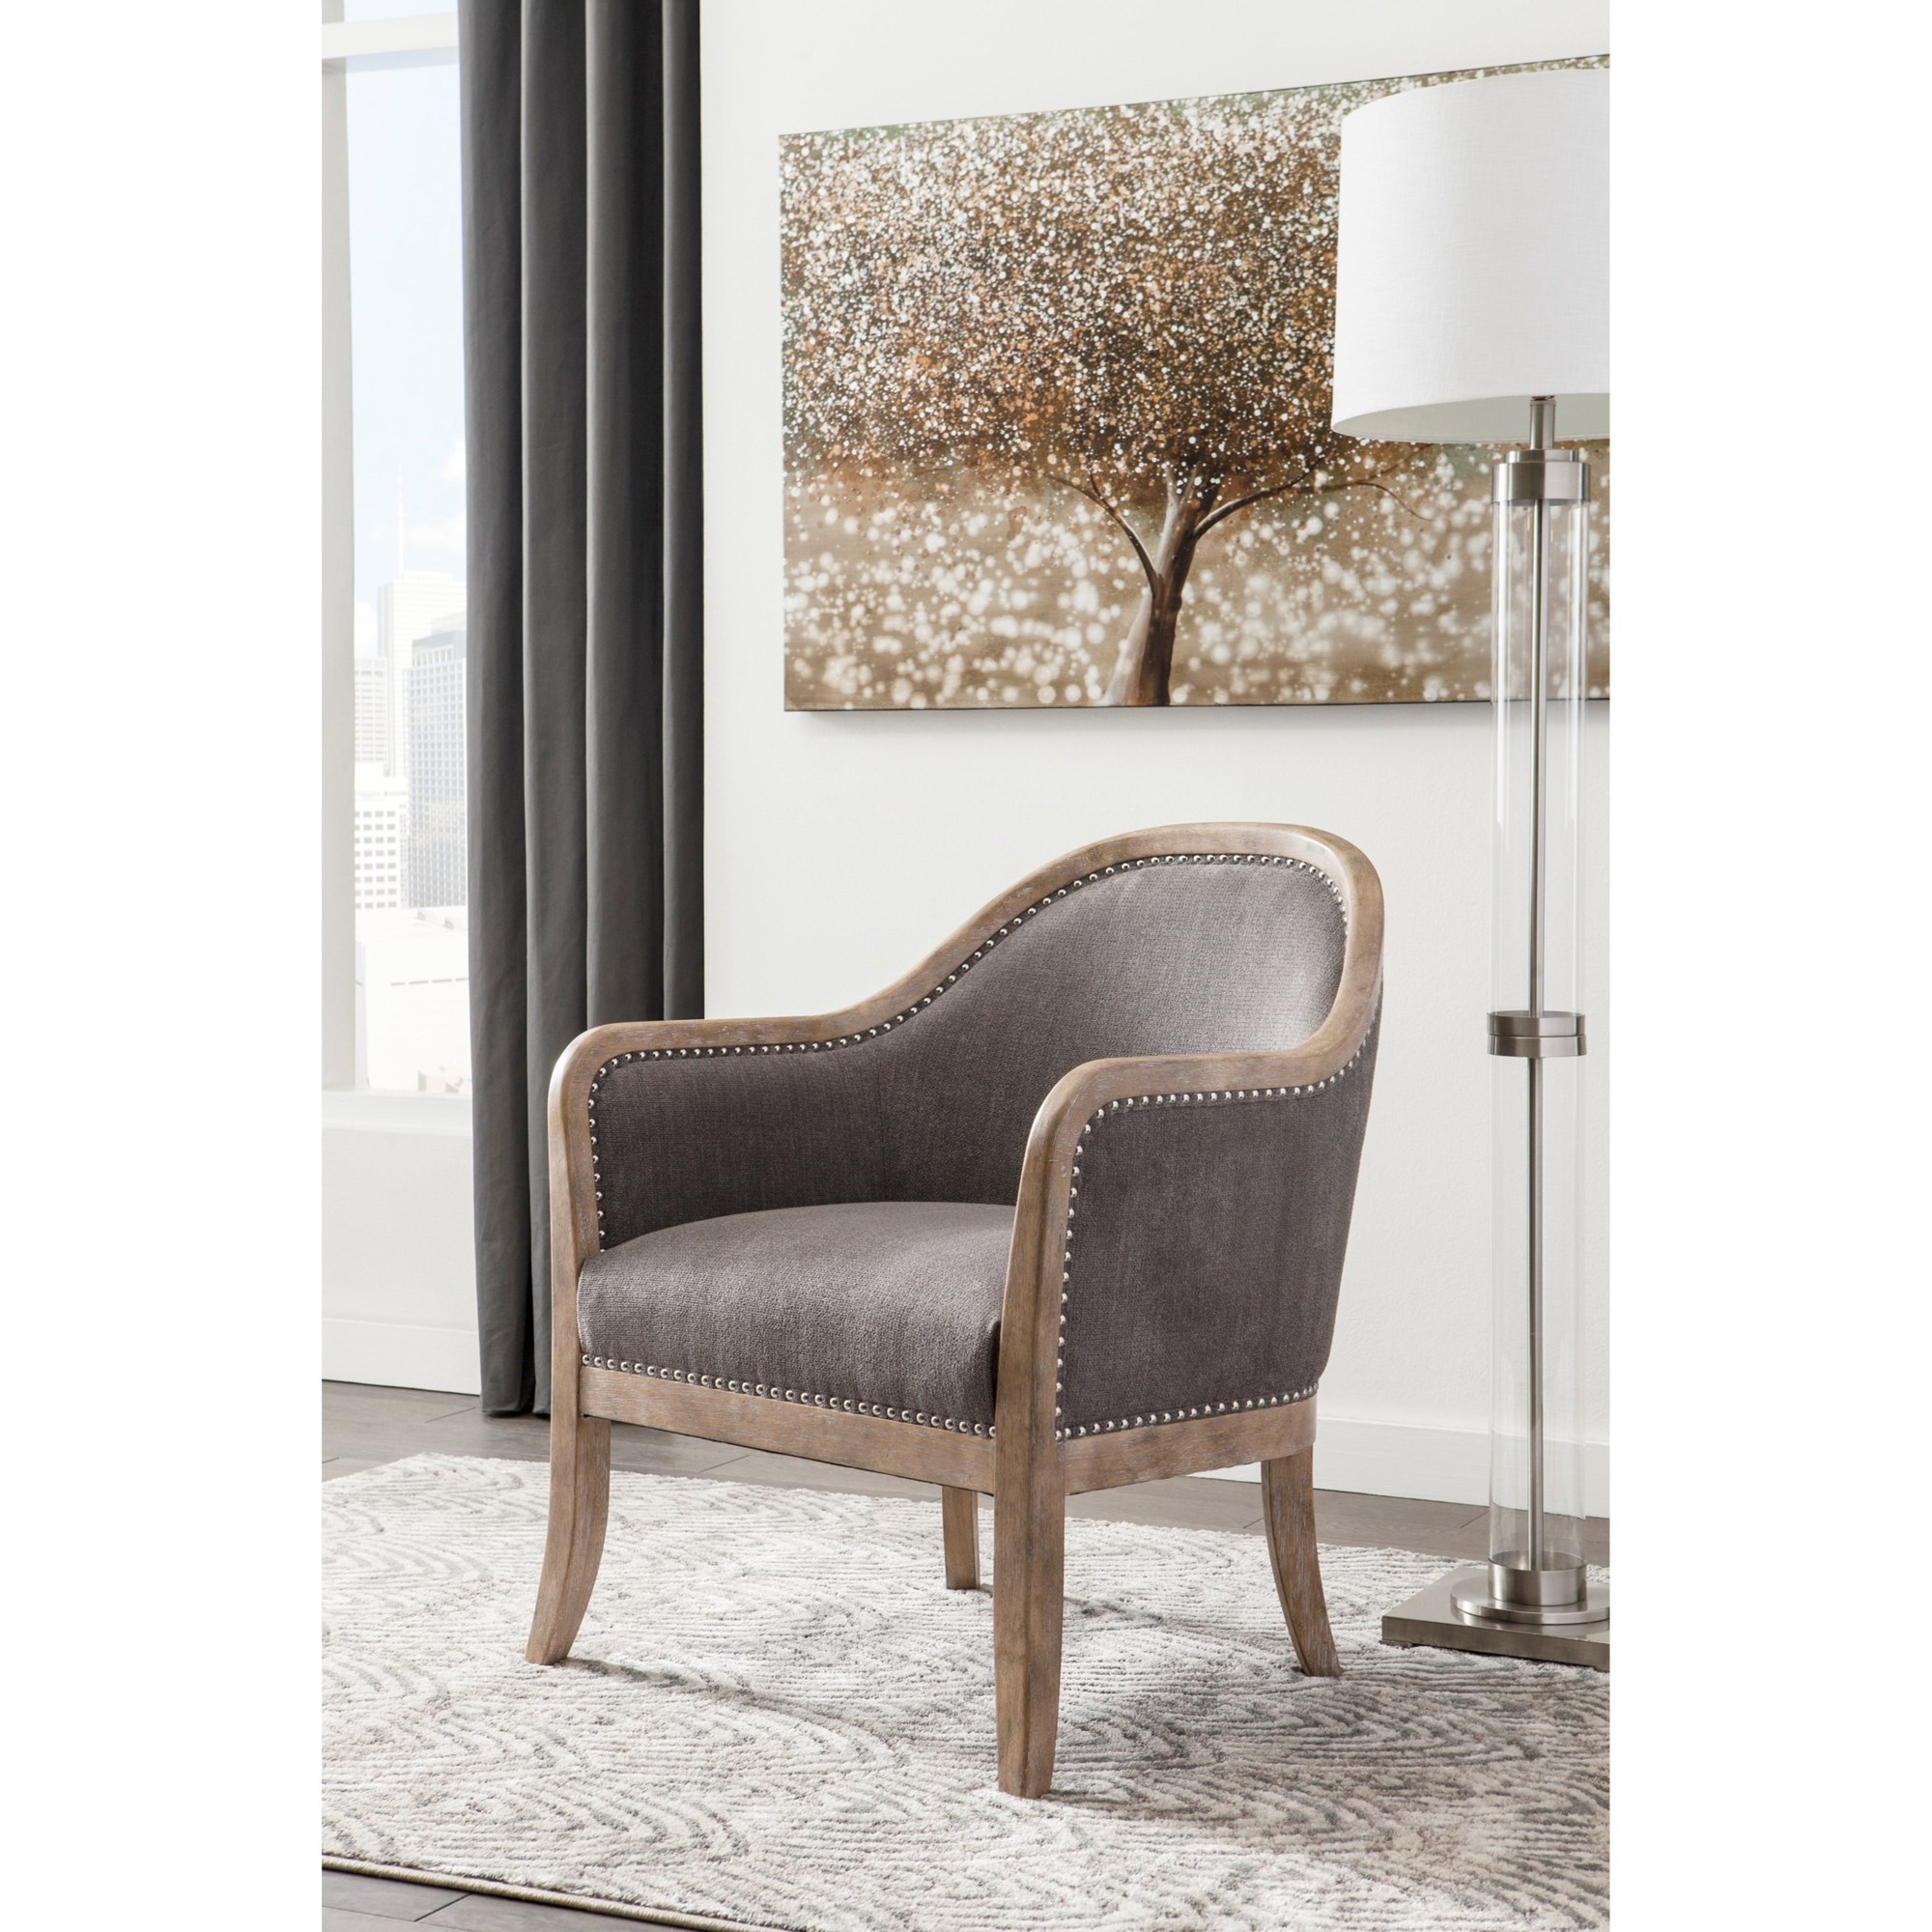 Cool Accent Chairs That Make a Statement